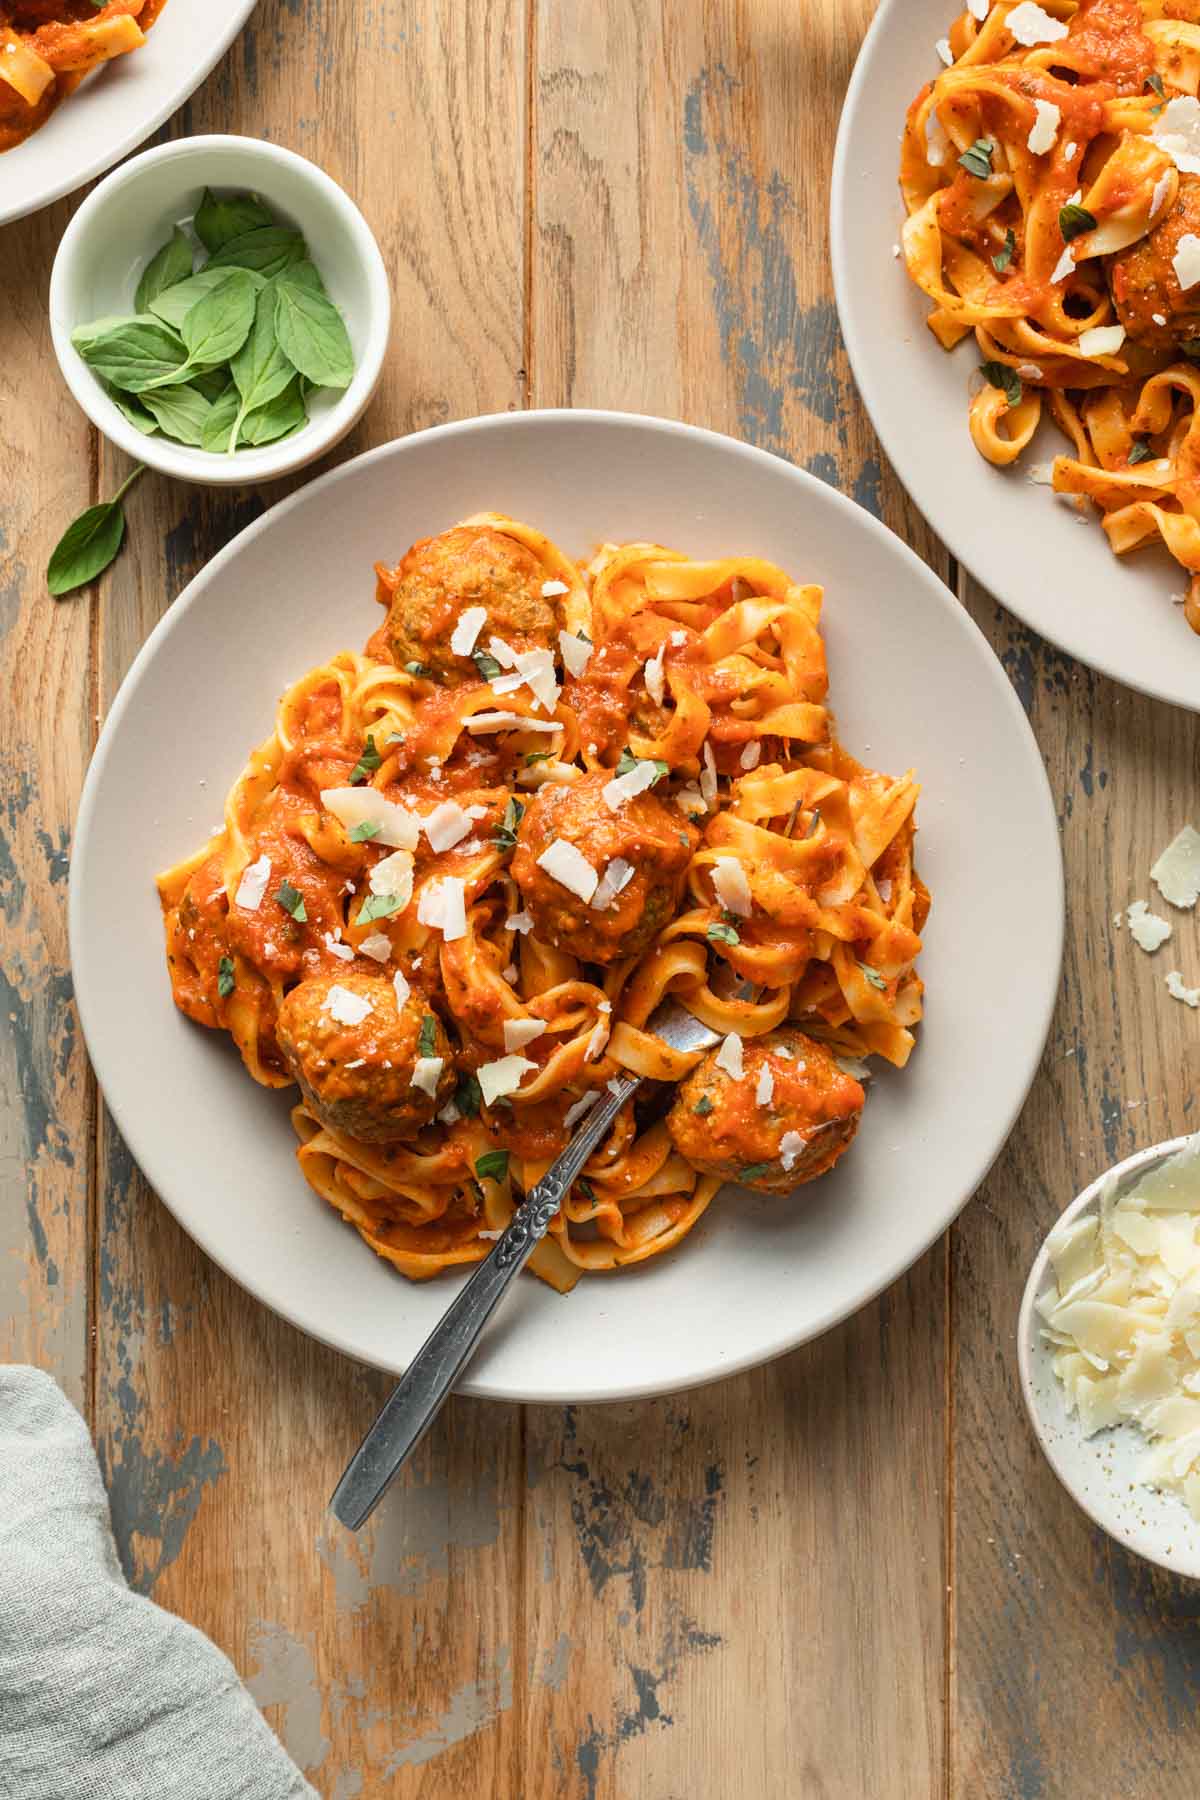 Turkey meatballs tossed with pasta and sauce on a plate.